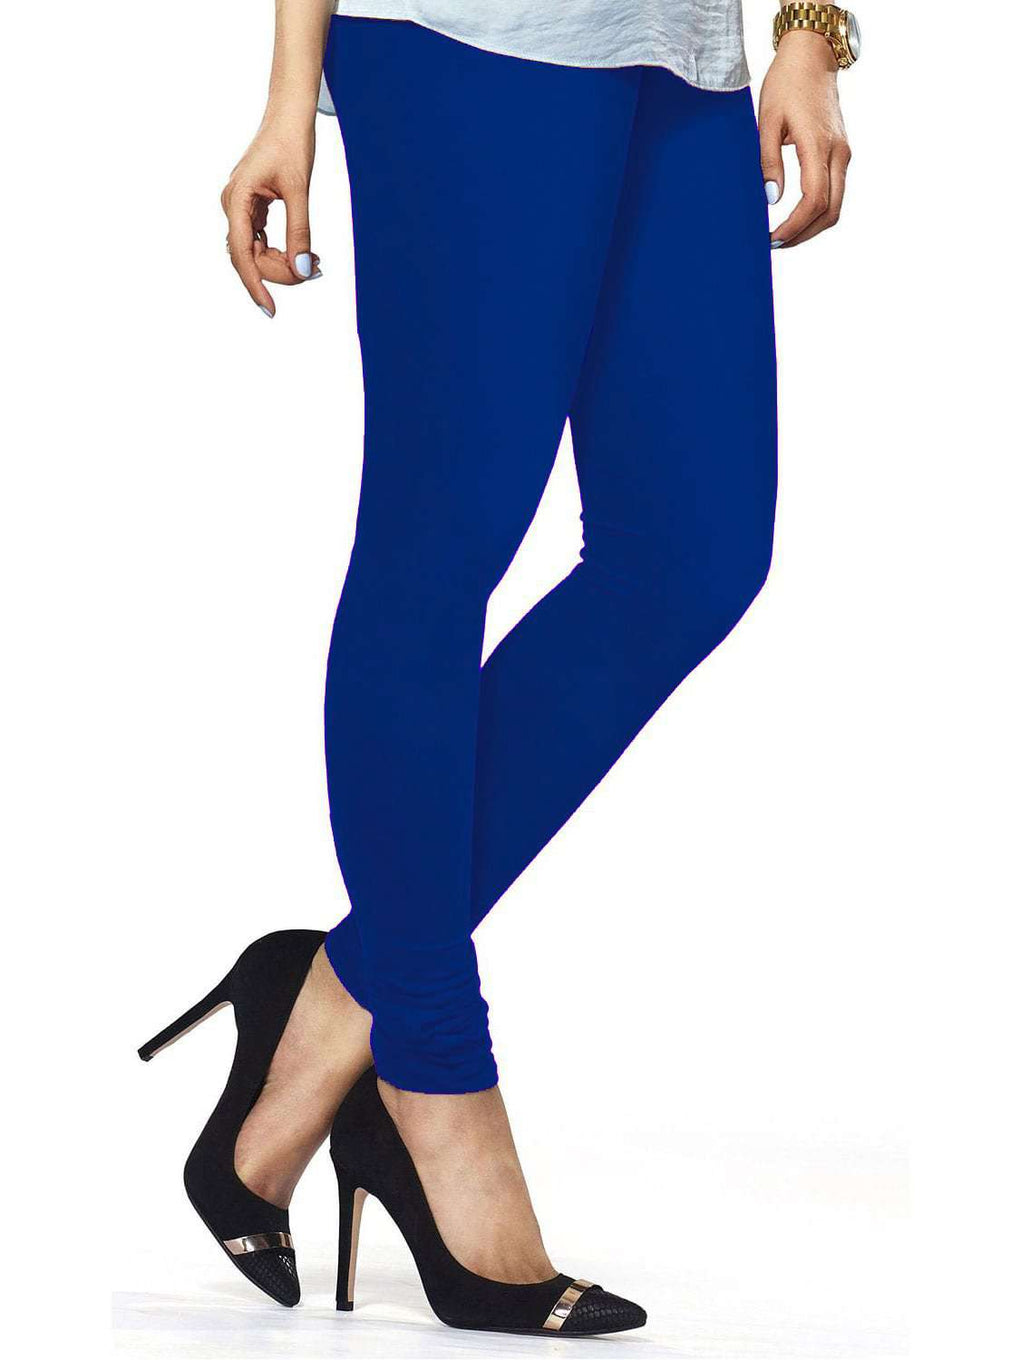 Buy Lili Ultra Super Soft 220 GSM Stretch Bio Wash Churidar Leggings  Regular Sizes 20 Plus Solid Colors Online at Low Prices in India -  Paytmmall.com